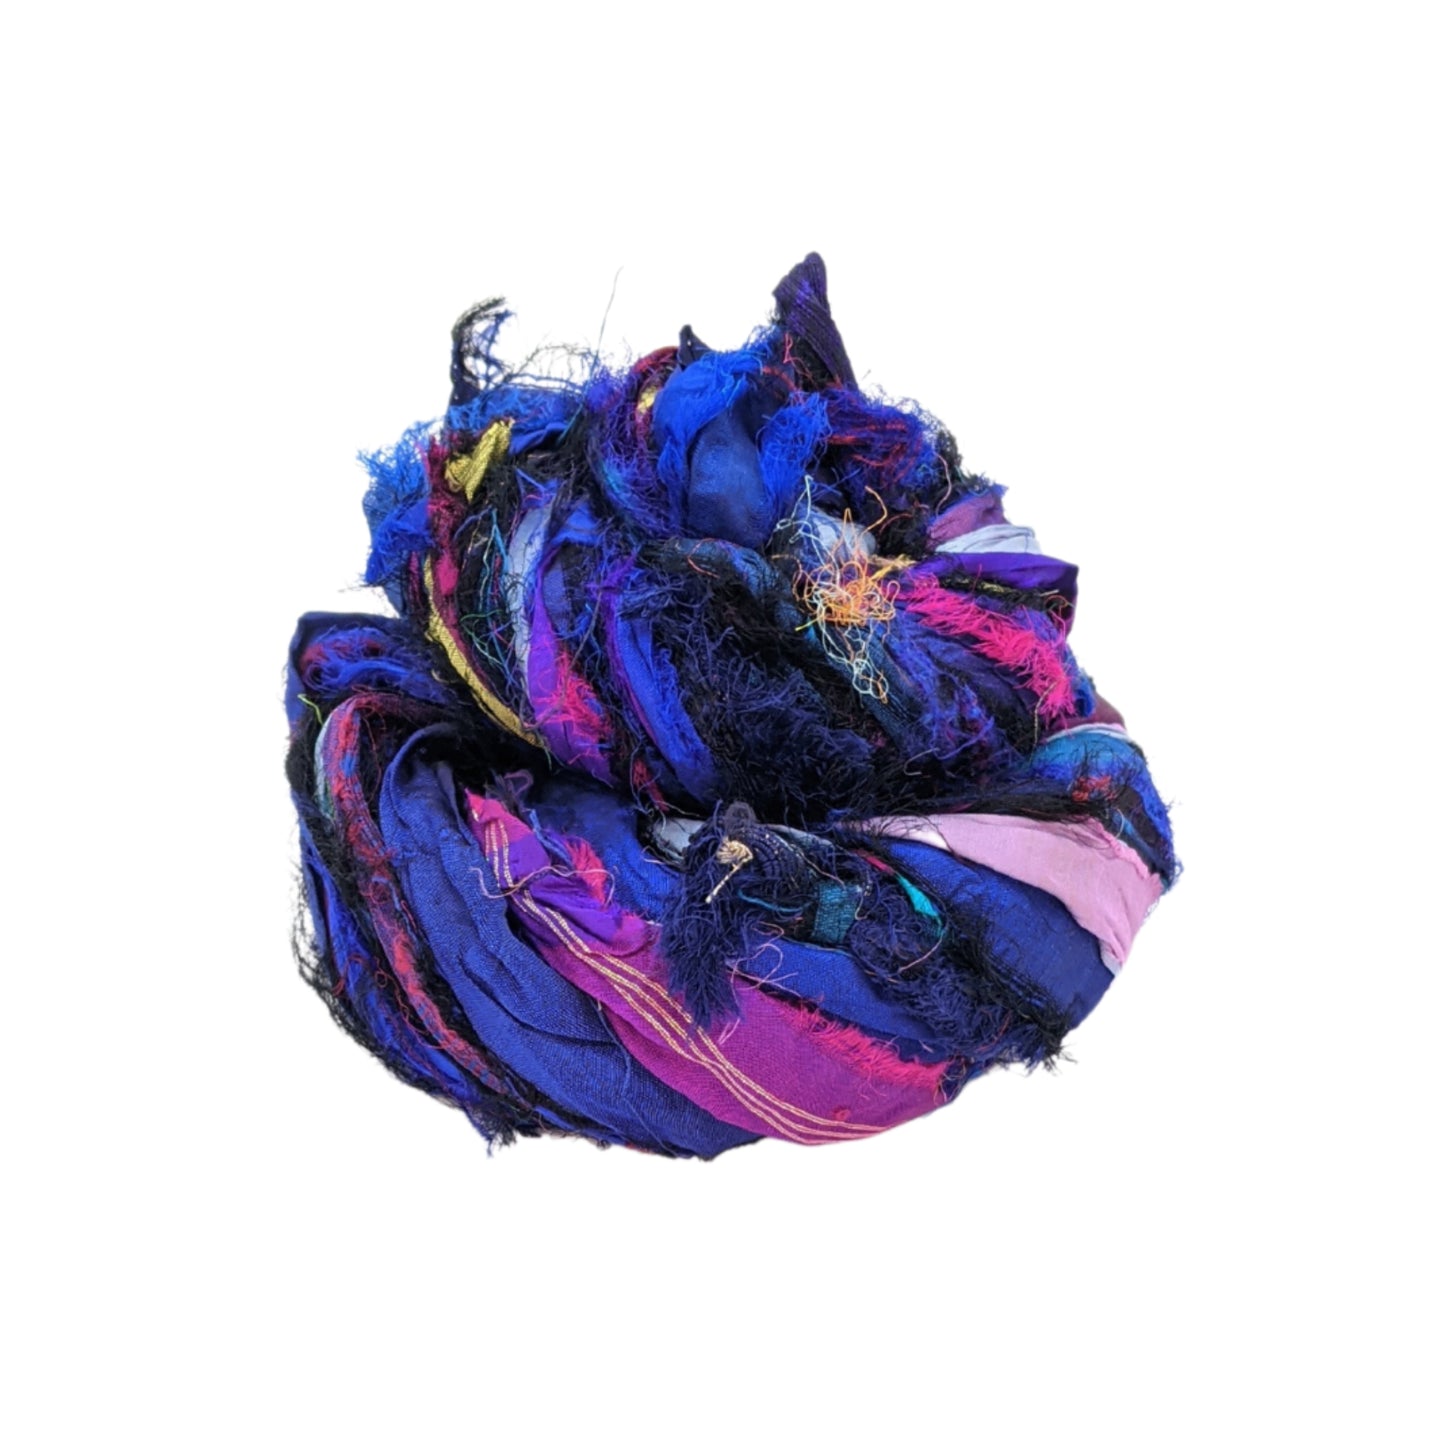 A side view of Windswept Sari Silk Ribbon in Indigo colors on a white background. The ribbon is made into a birds nest to show the different colorways. Indgio Windswept includes rich purples and blues to blacks and pinks.